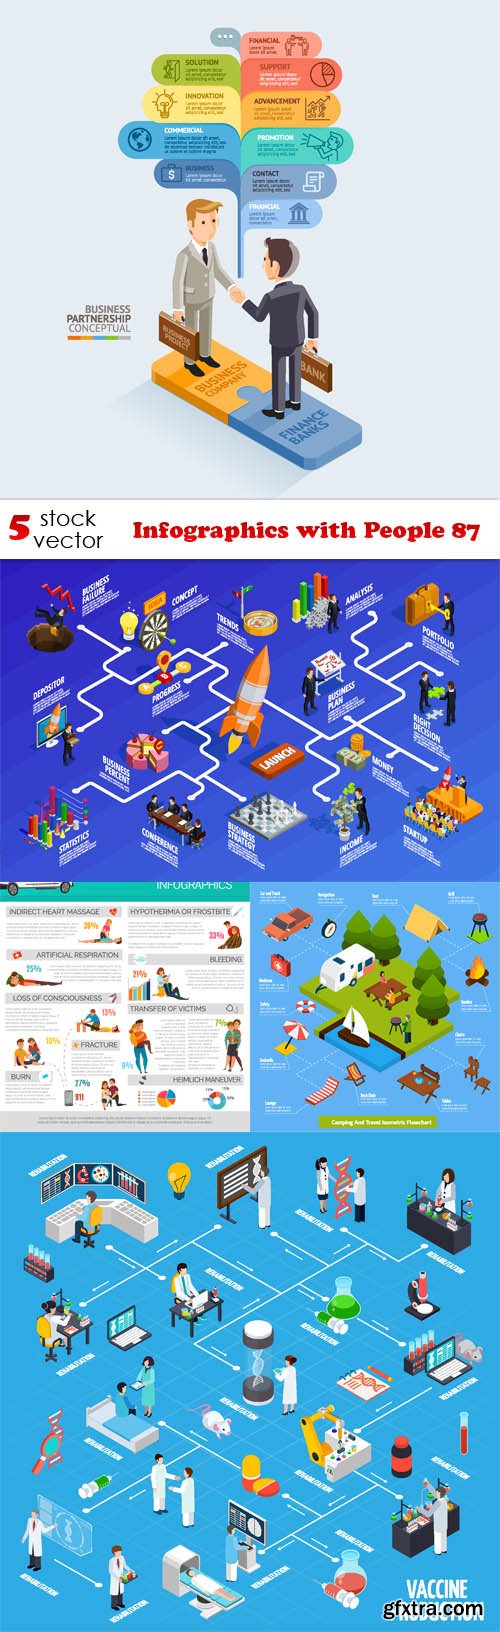 Vectors - Infographics with People 87